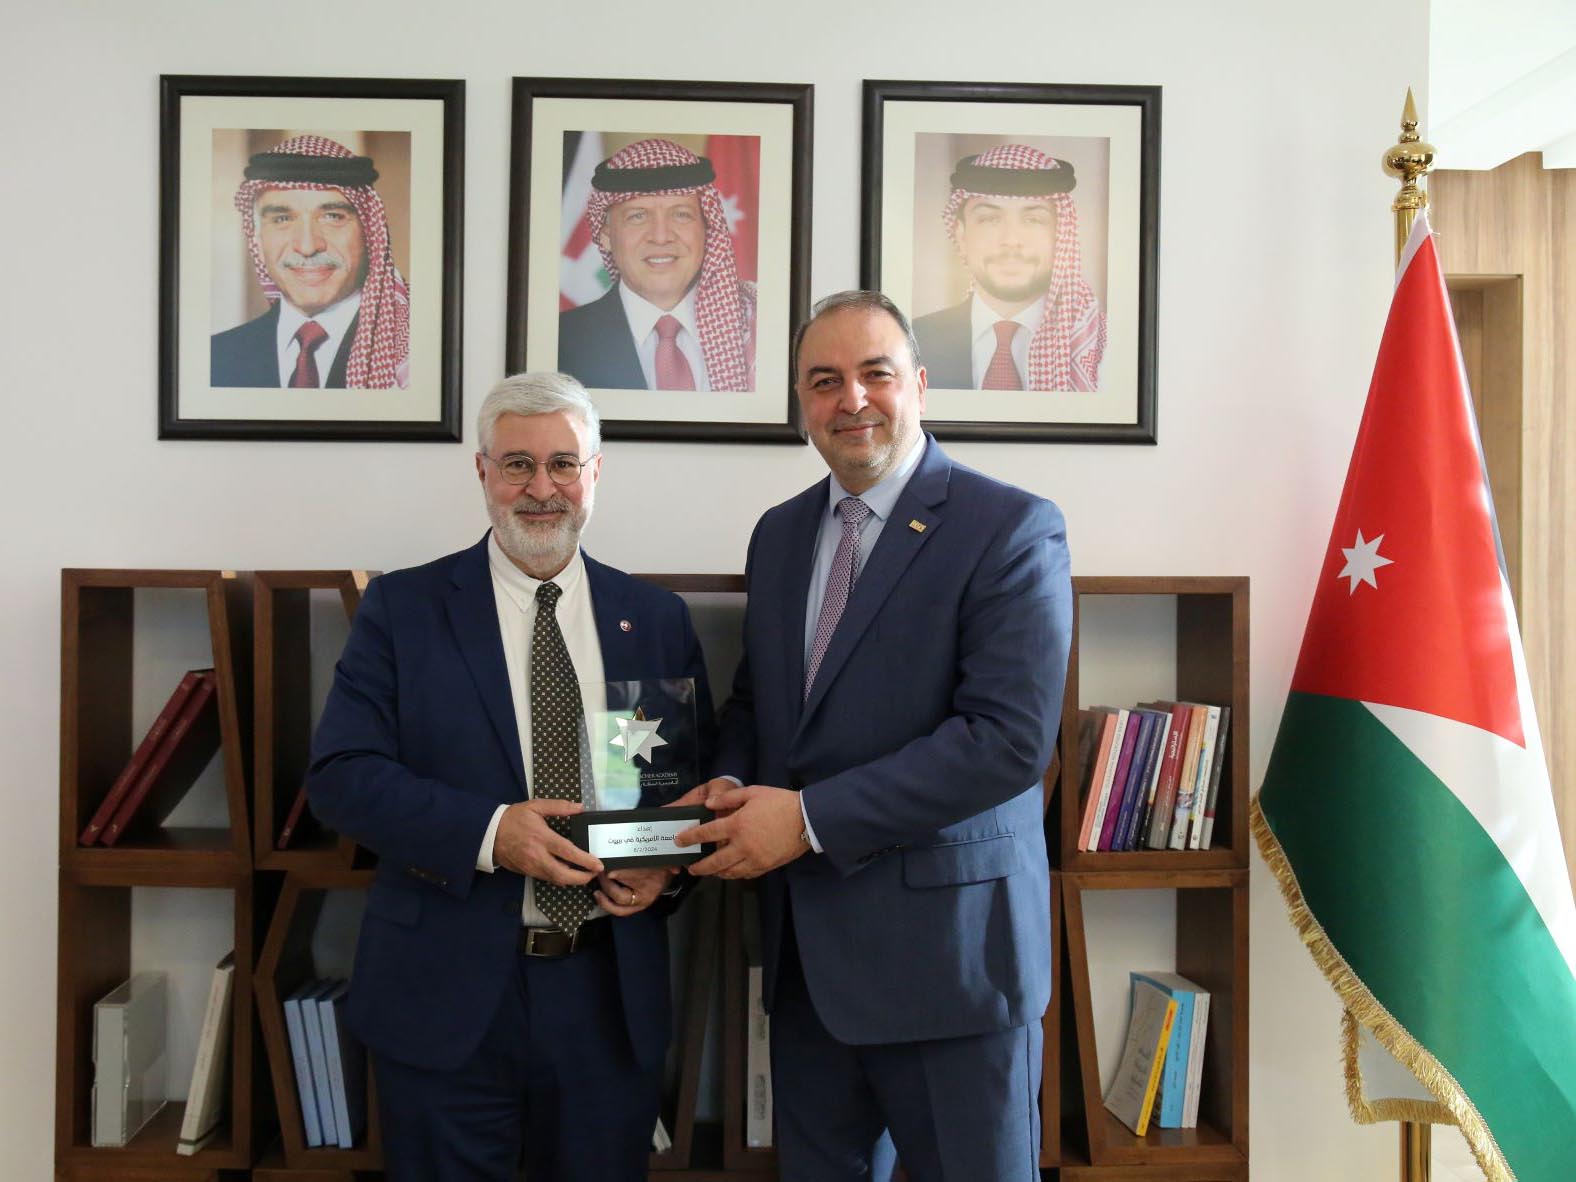 AUB and QRTA to elevate the standard of education in the Arab World